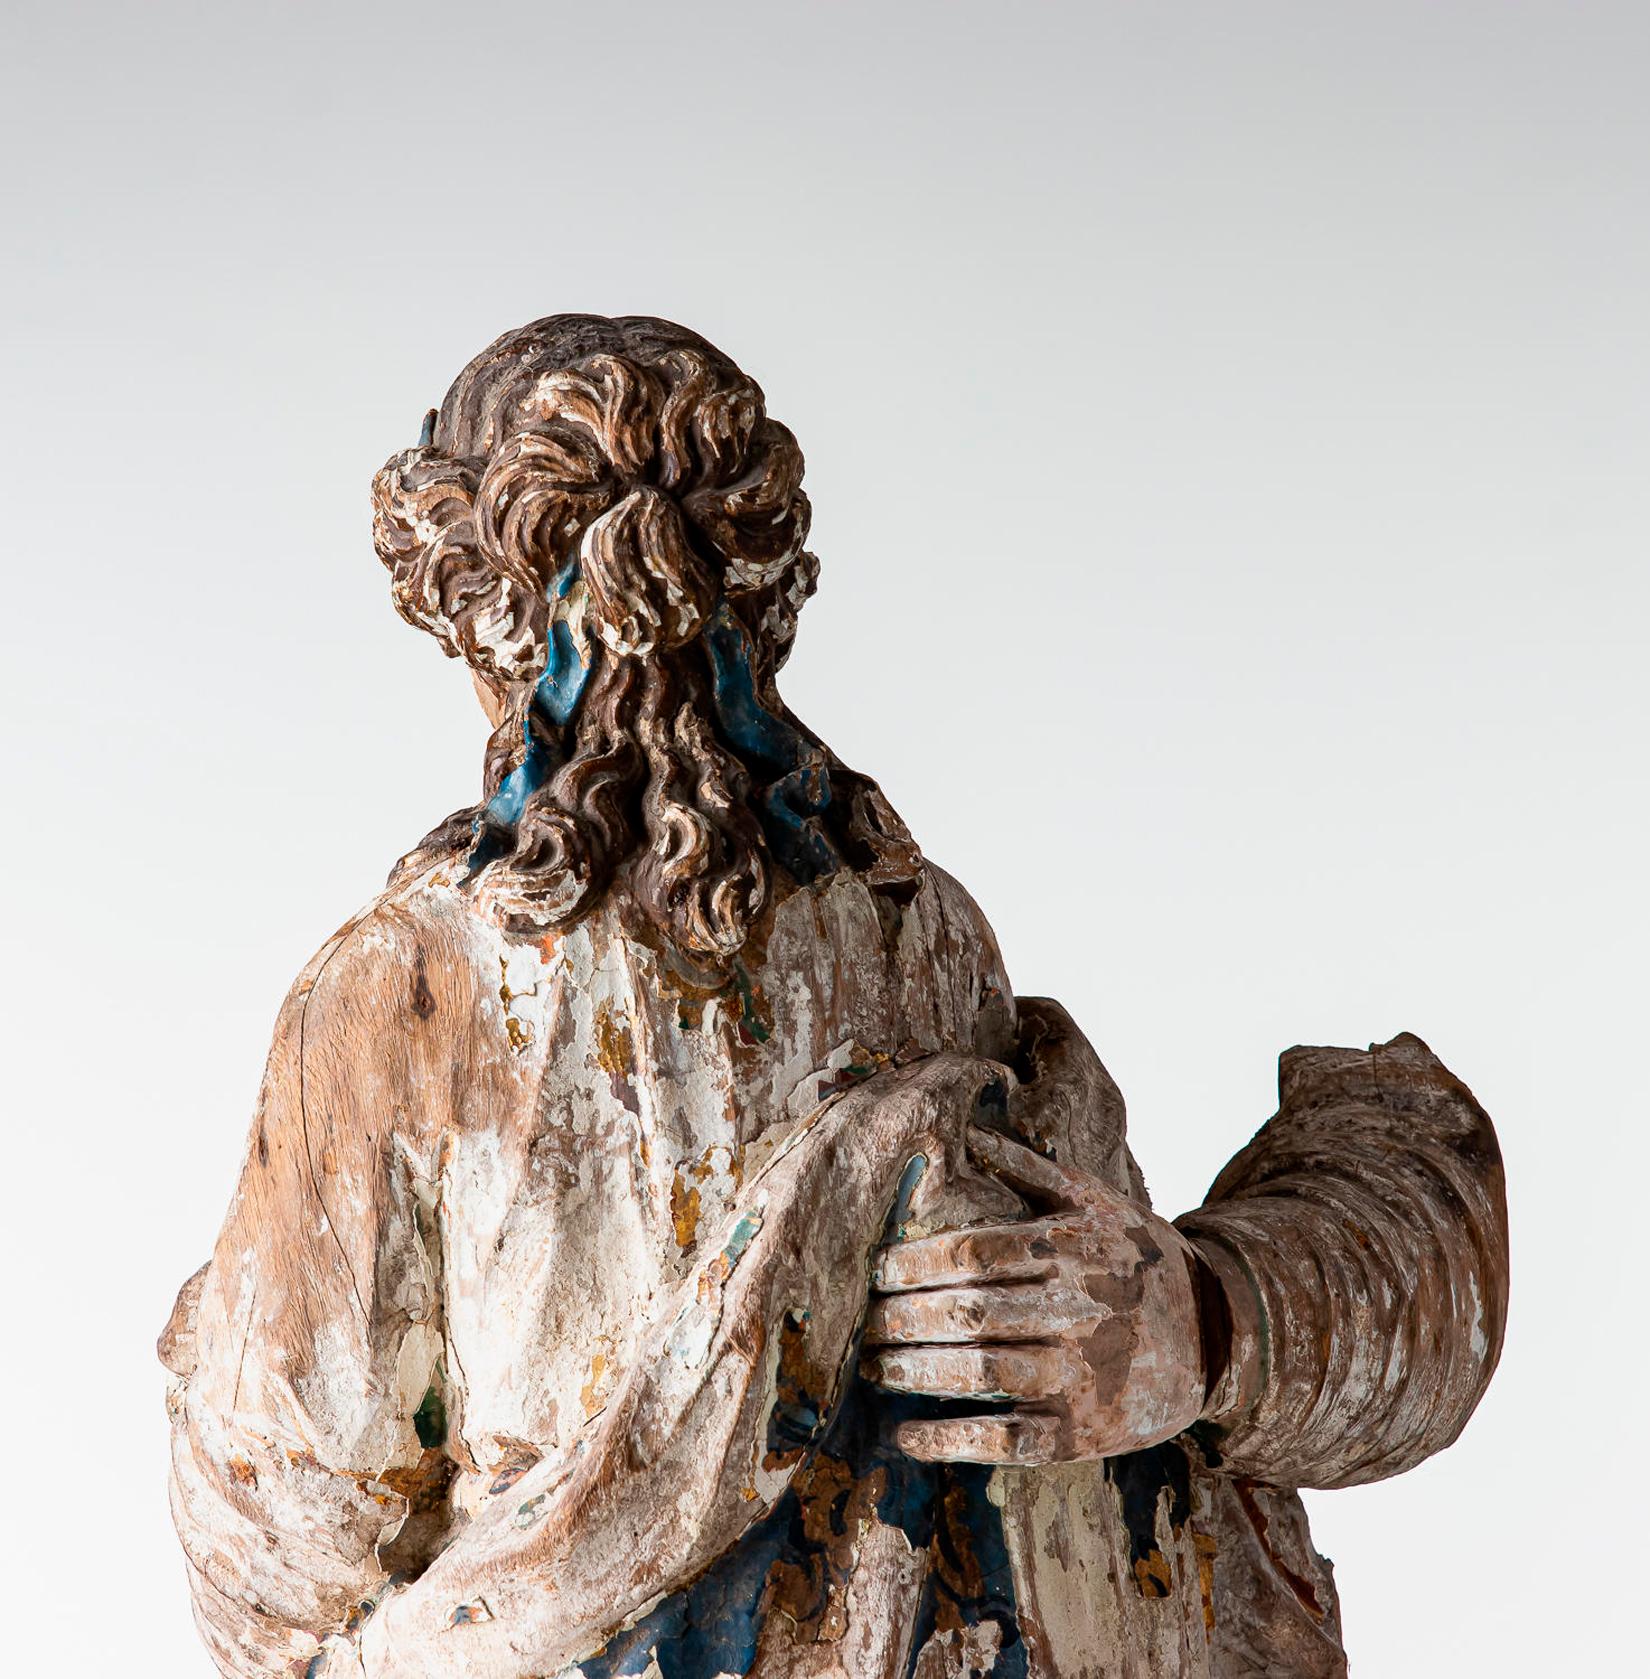 18th century, Baroque, Italian school, sculpture carved in wood.
European oak painted sculpture with patina, early 18th century. Probably part of a larger sculpture, you can see a hand holding her waist. Damage and color loss.
The woman pictured